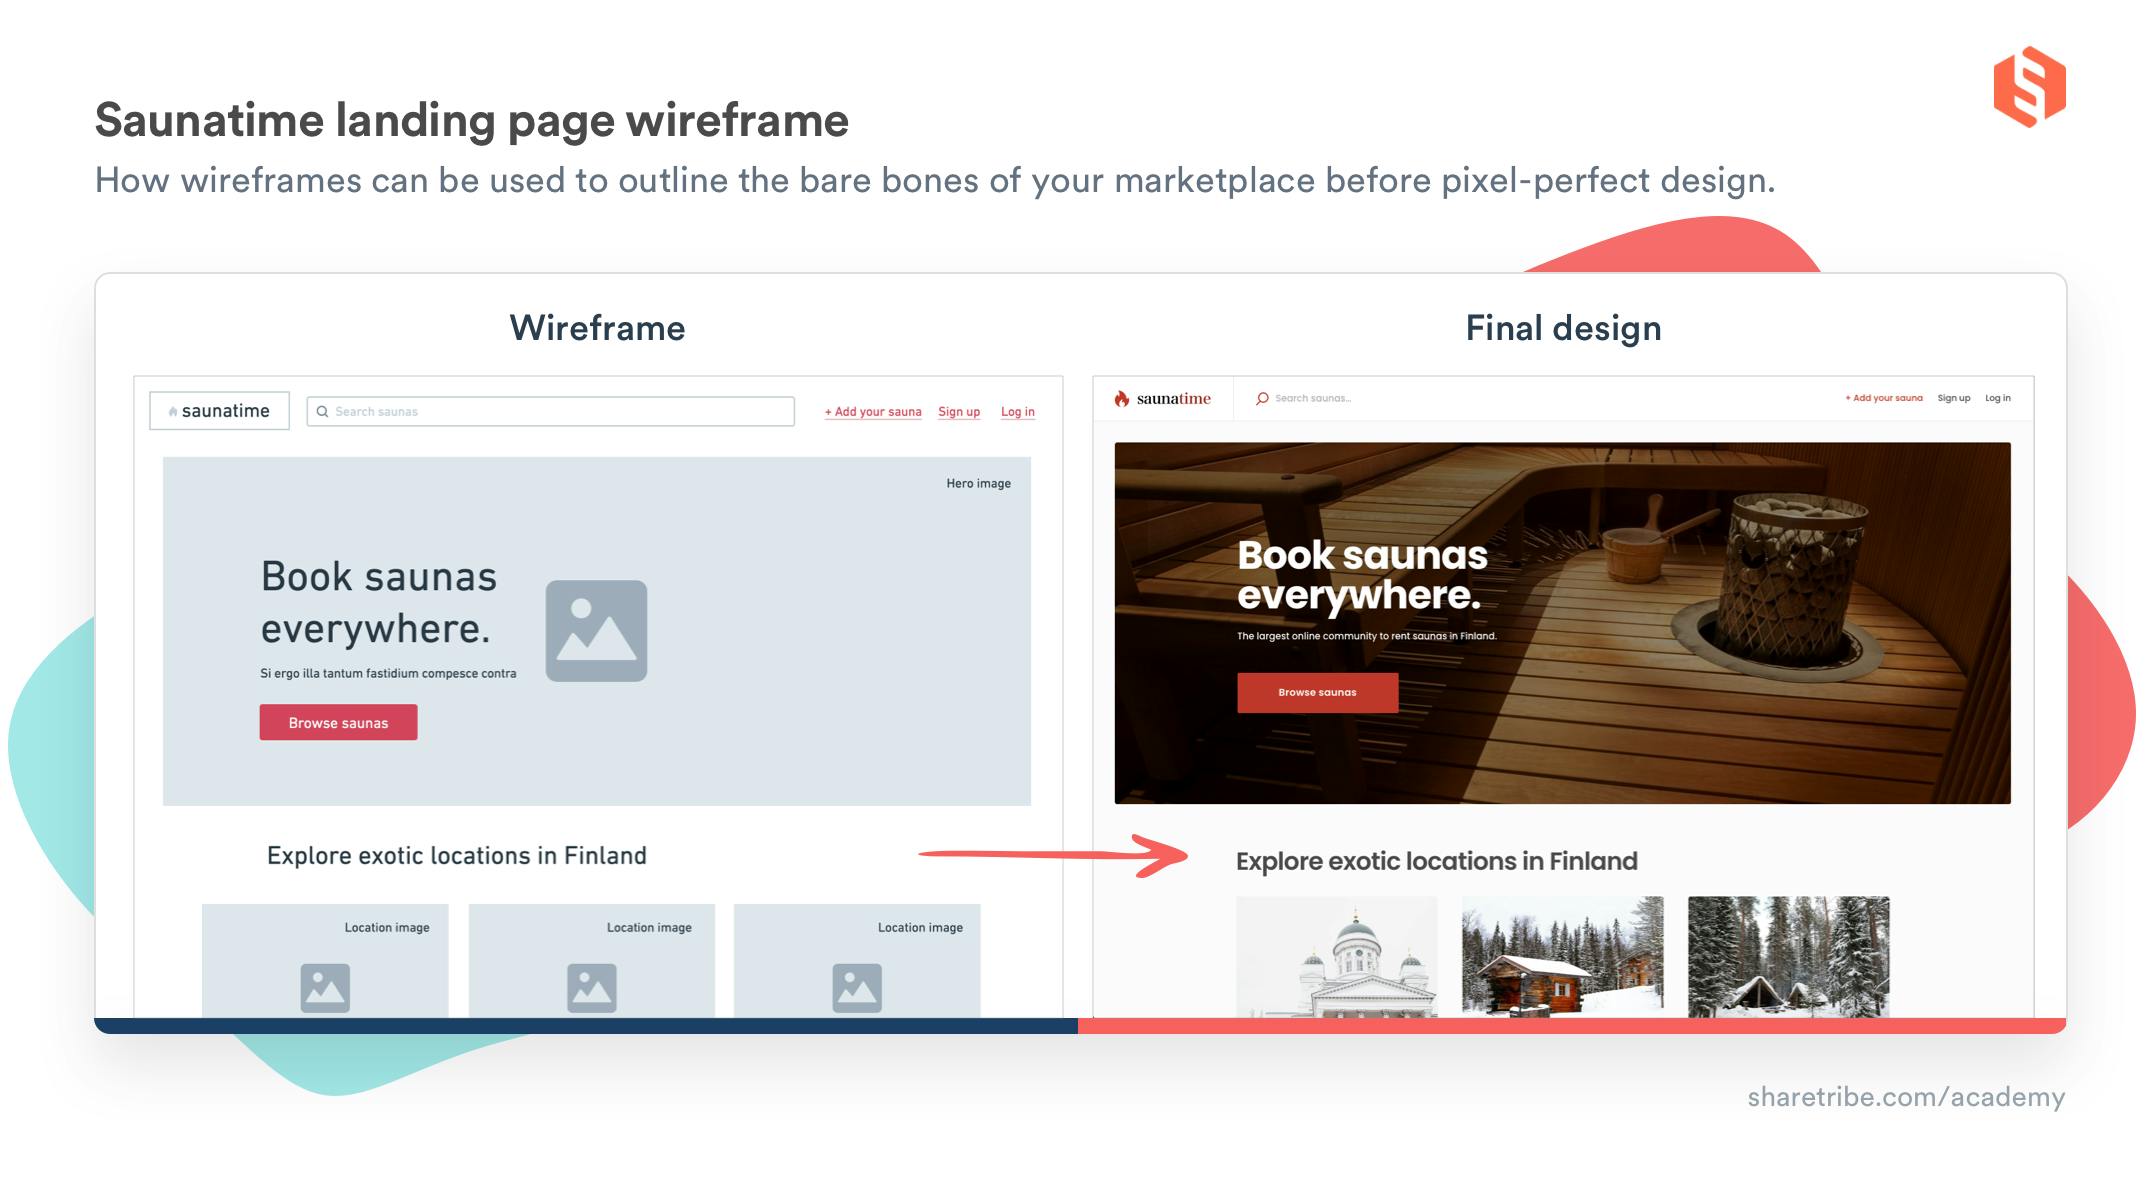 An image exemplifying wireframes. A simple wireframe of the Saunatime landing page next to the final design with a large hero image featuring a modern sauna and the text "Book saunas everywhere".